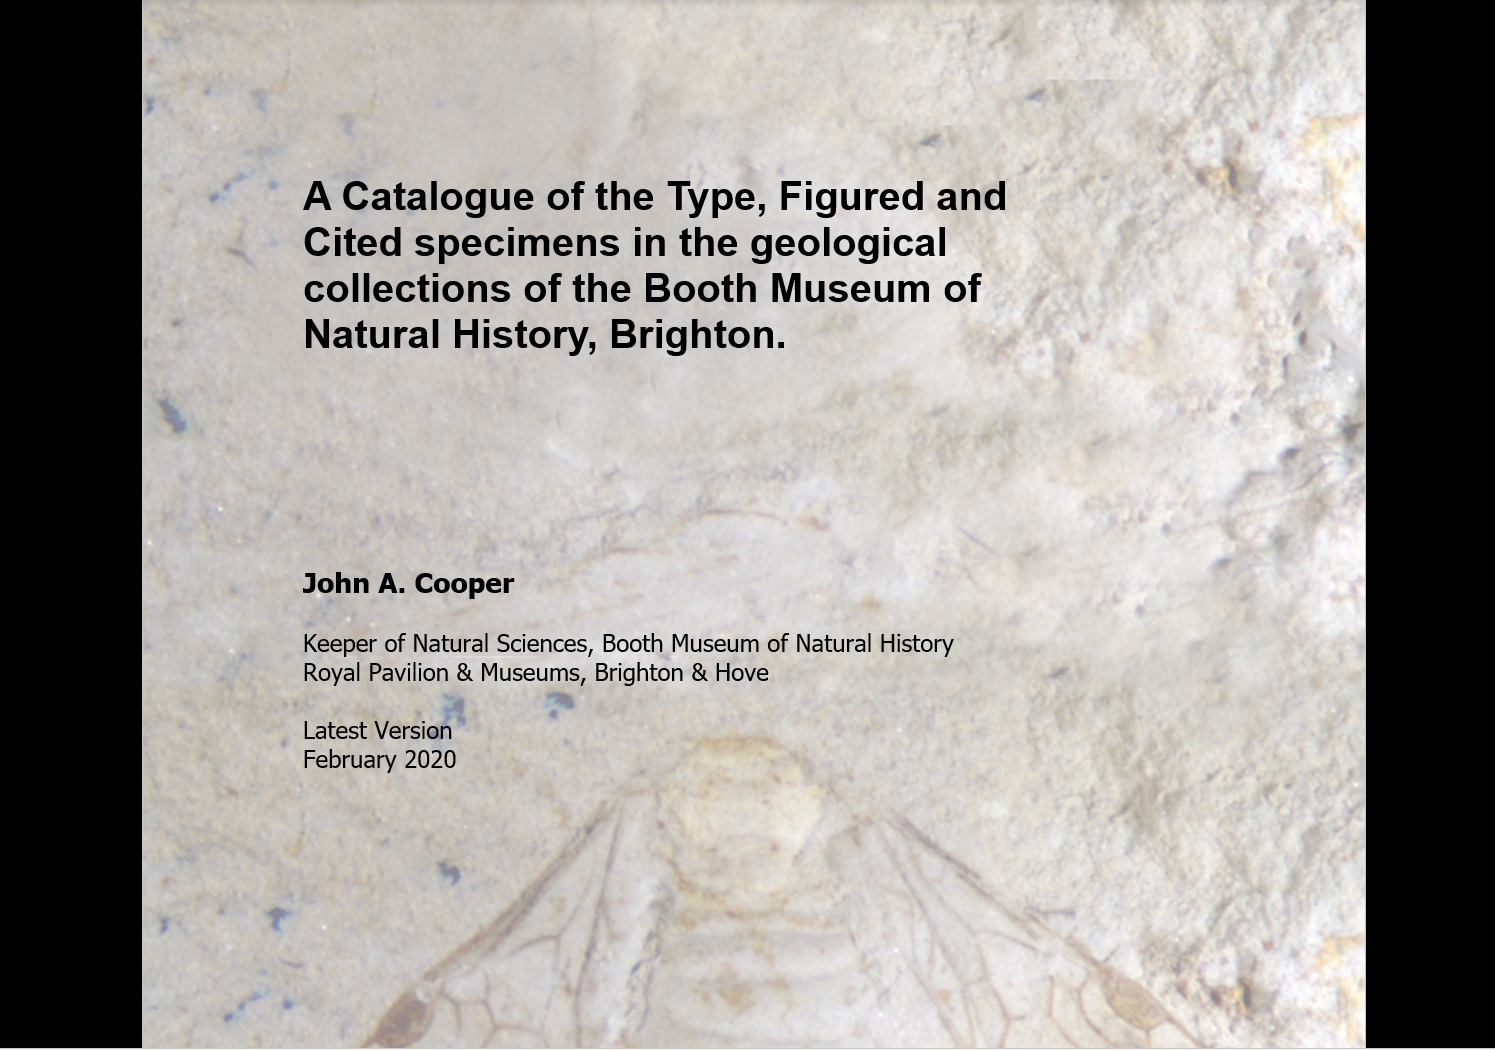 A Catalogue of the Type, Figured and Cited specimens in the geological collections of the Booth Museum of Natural History, Brighton.